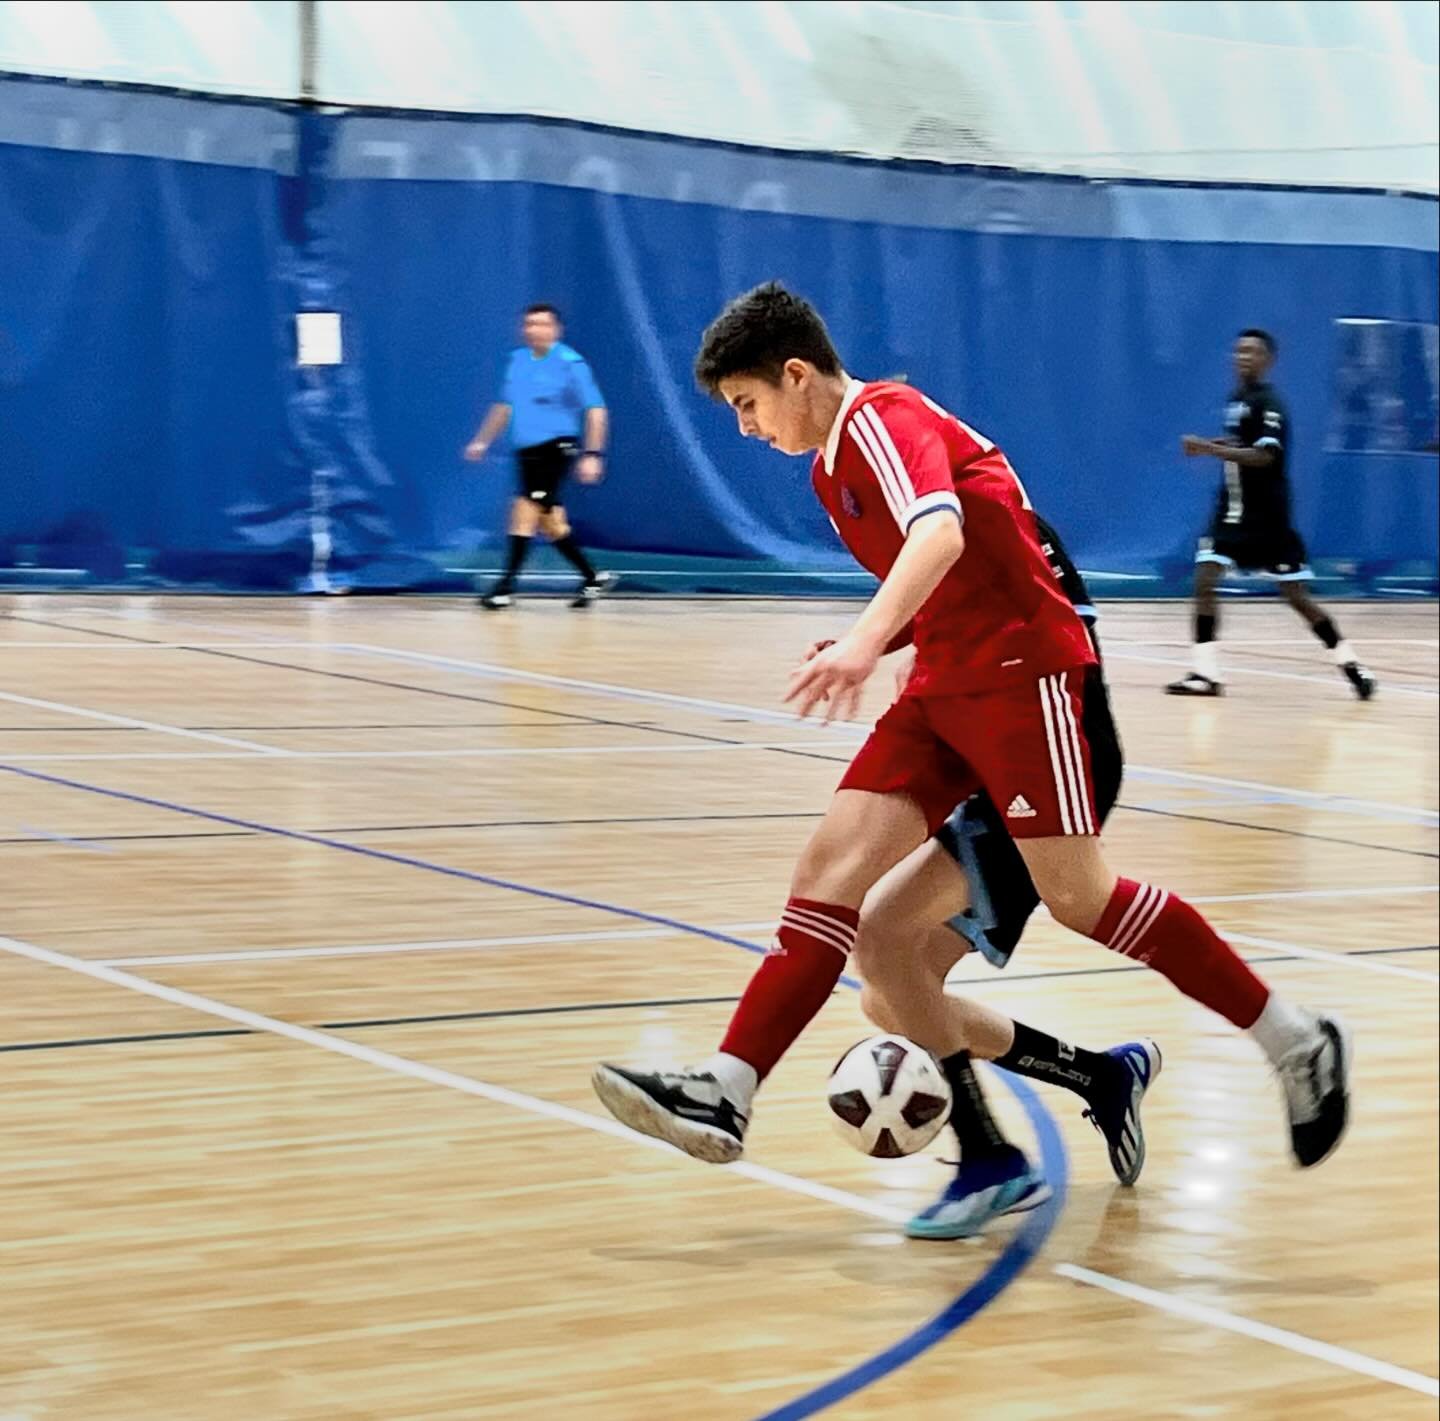 More highlights of today&rsquo;s matches. 
Congrats to the U14 Red team moving onto the semi-finals in the Ontario Futsal Cup!